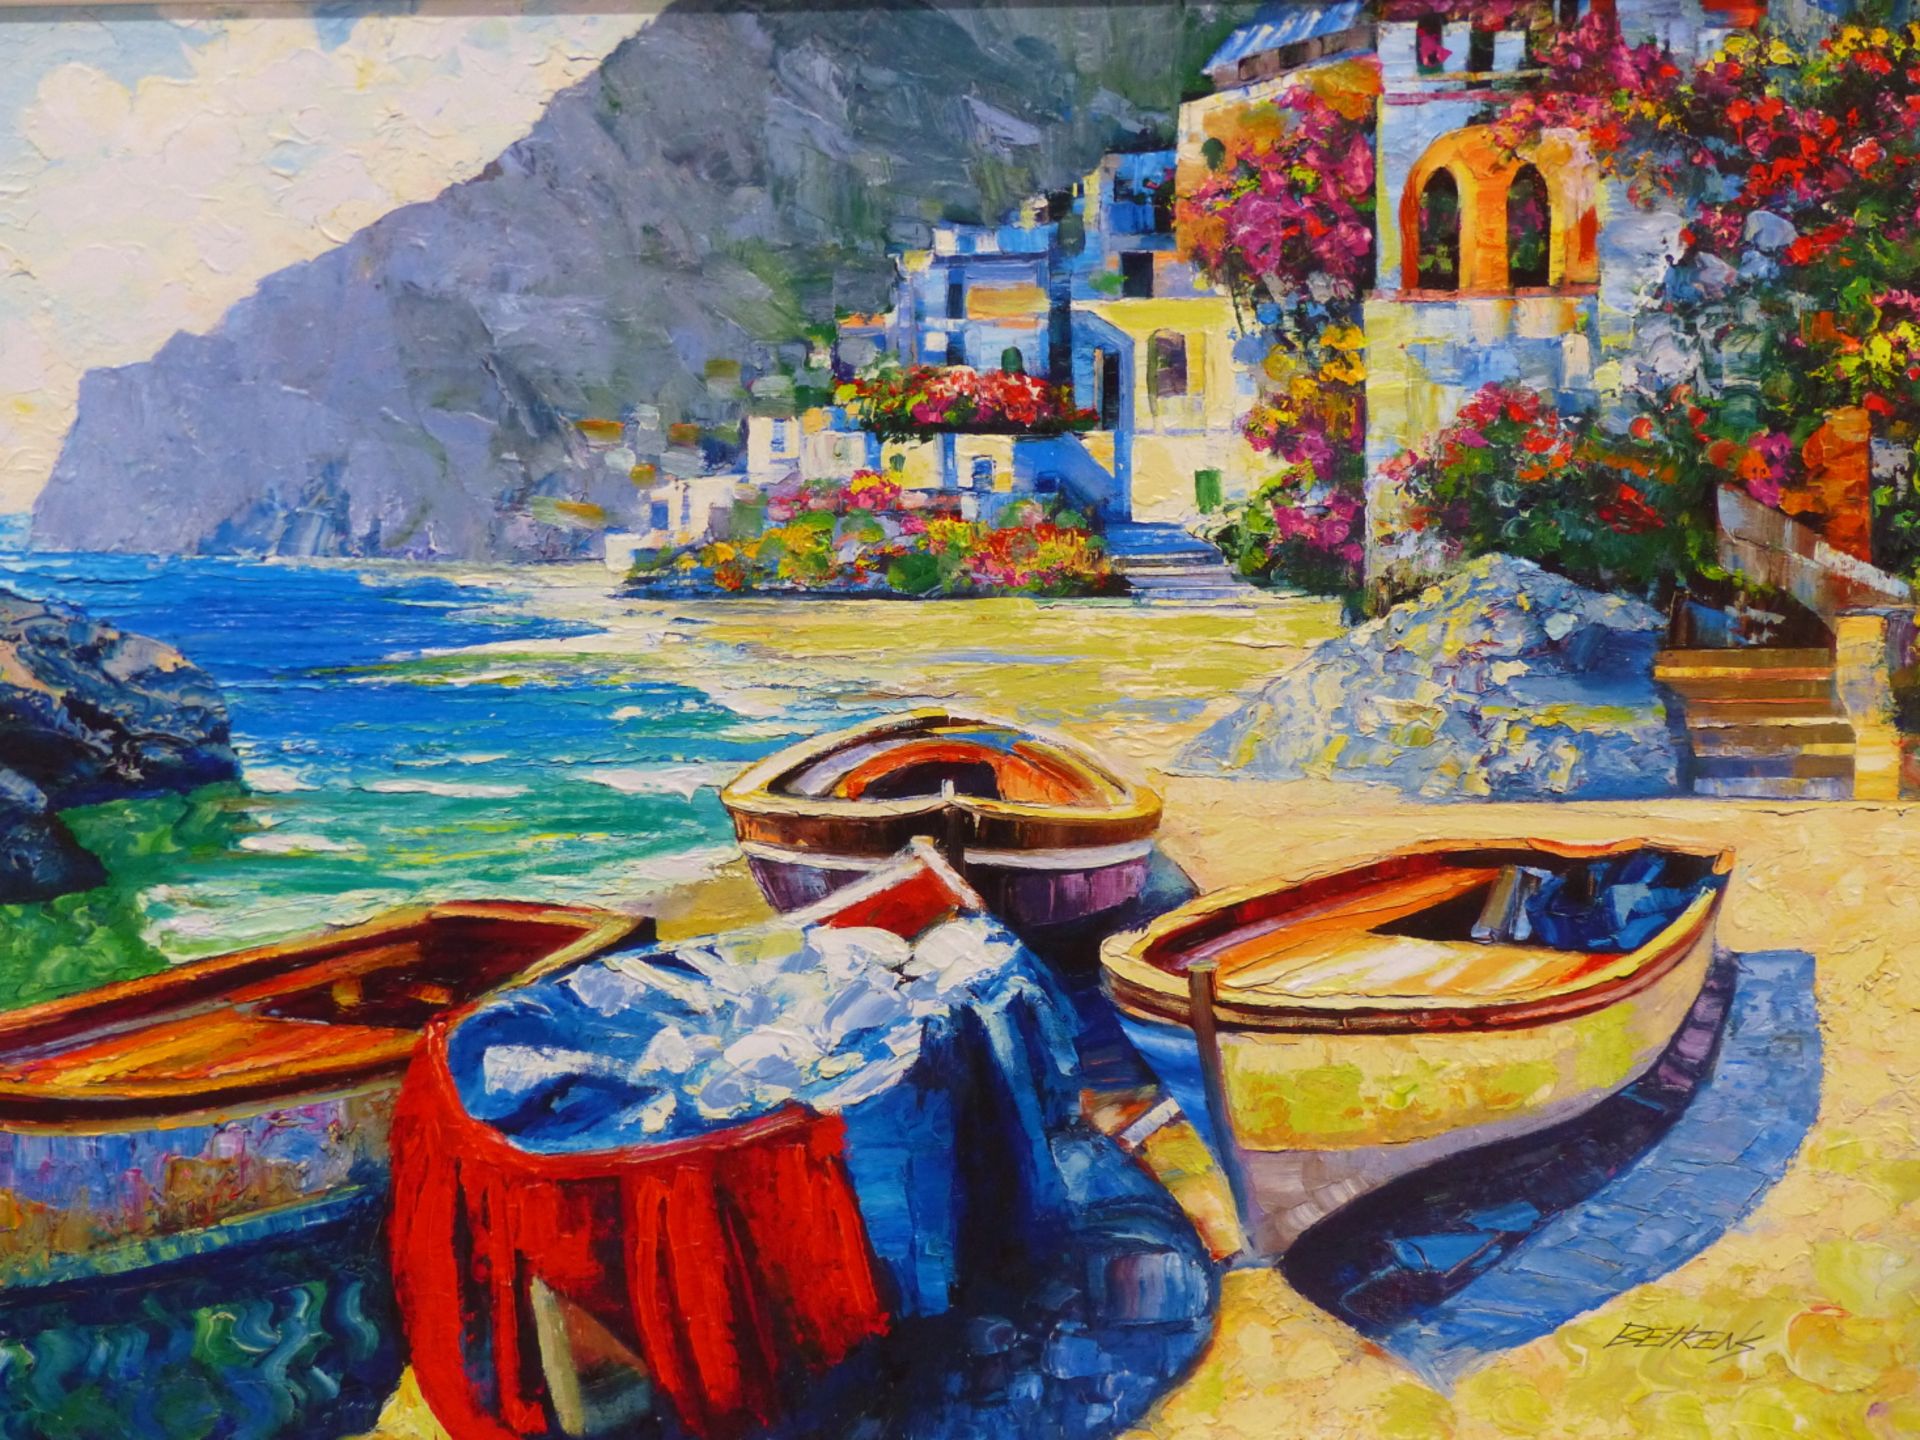 HOWARD BEHRENS (1933-2014) AMERICAN, SEASIDE, SIGNED, MIXED MEDIA ON CANVAS, 79 X 59CM. GALLERY